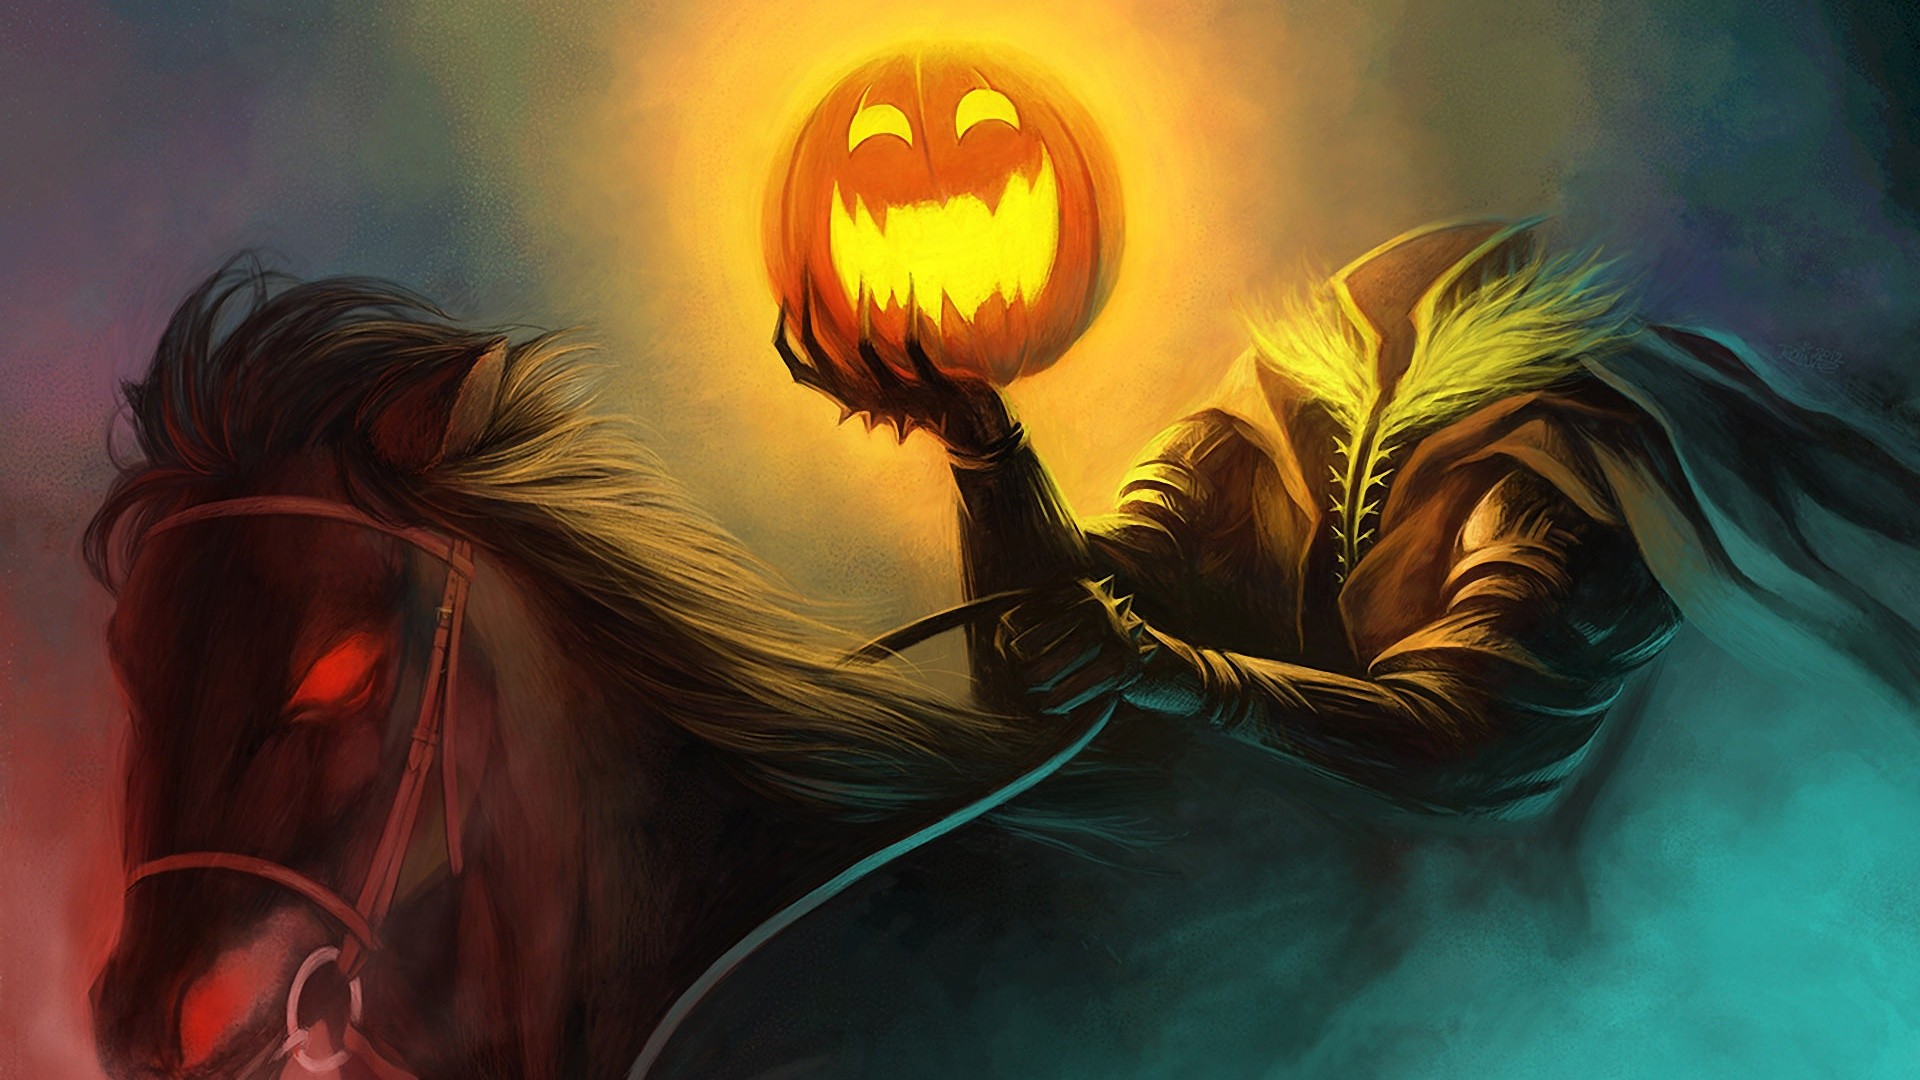 1920x1080 Halloween Scary Wallpaper HD Backgrounds.